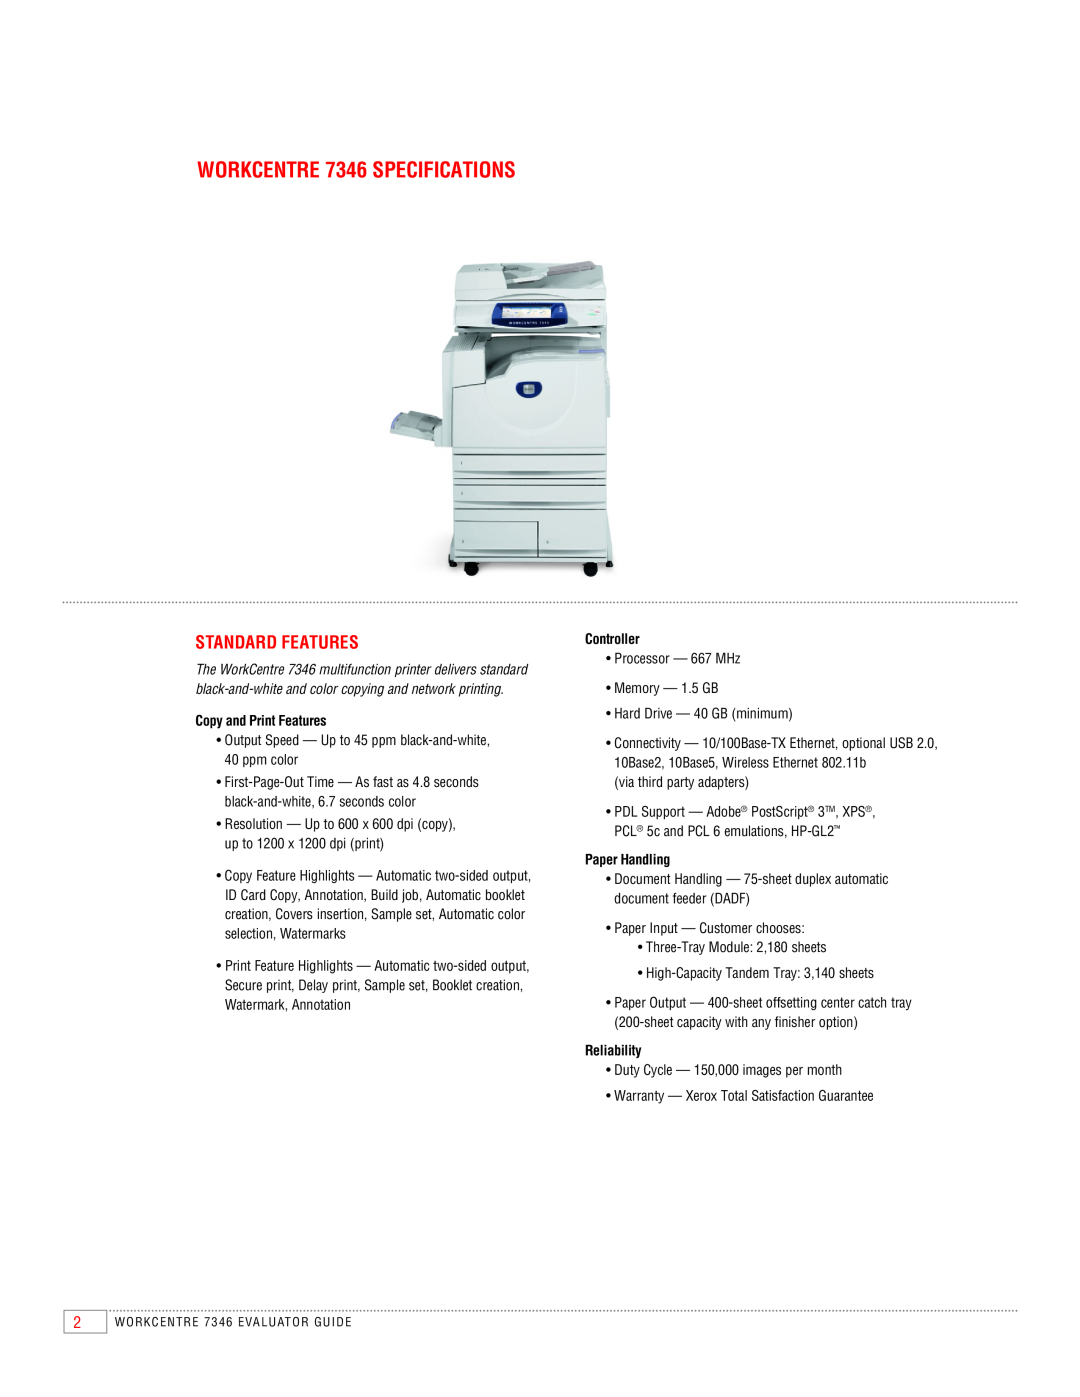 Xerox manual WORKCENTRE 7346 SPECIFICATIONS, STANDARD Features, Copy and Print Features, Controller, Paper Handling 